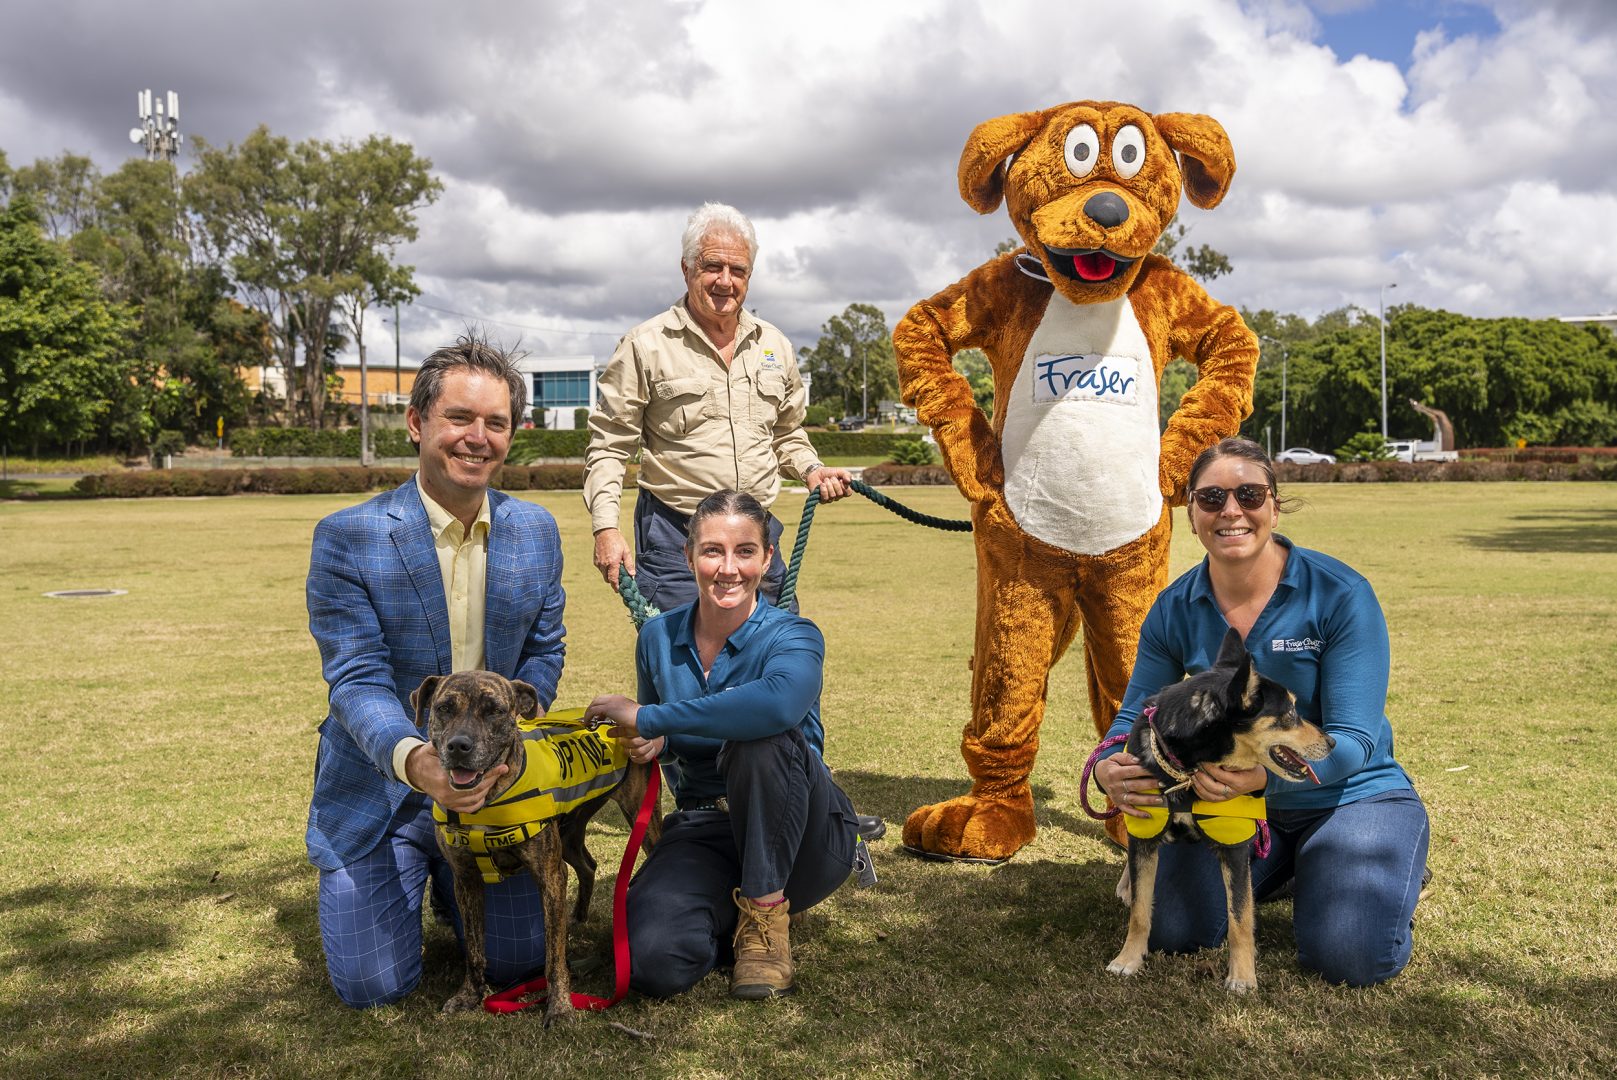 Stall holders sought for ‘A Dog’s Day Out’